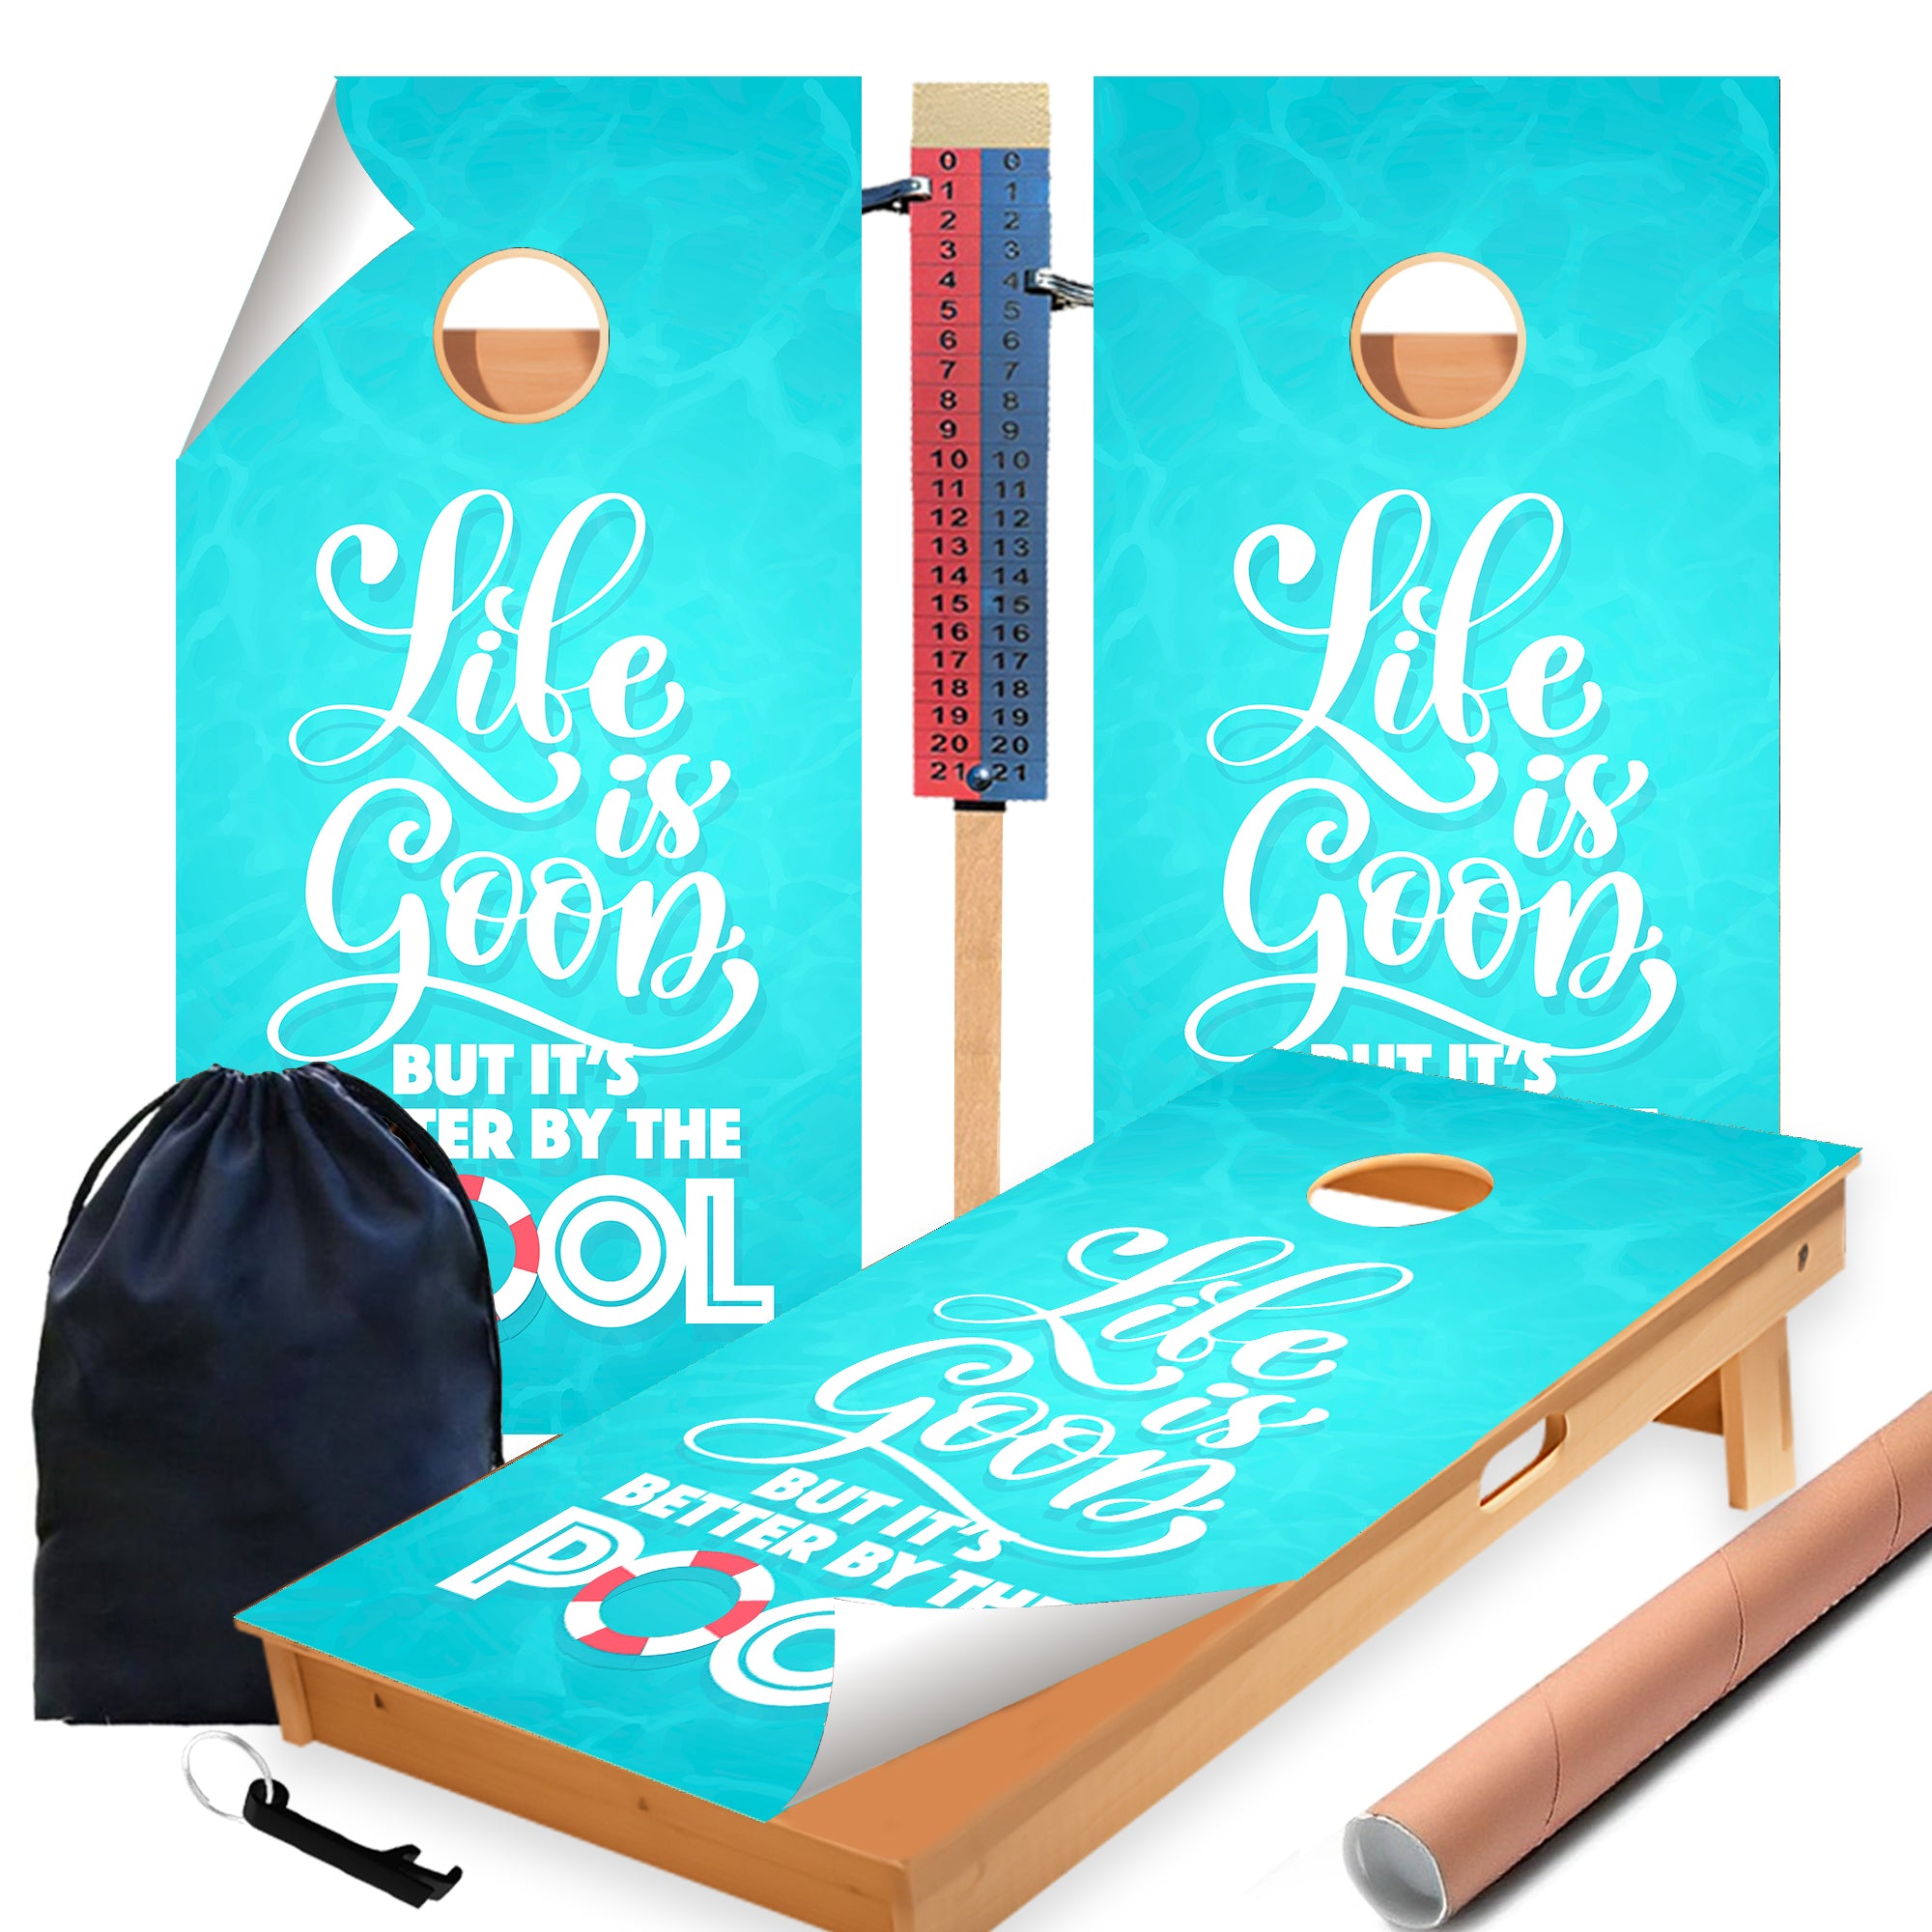 Life is Better by the Pool Cornhole Boards Wraps (Set of 2)